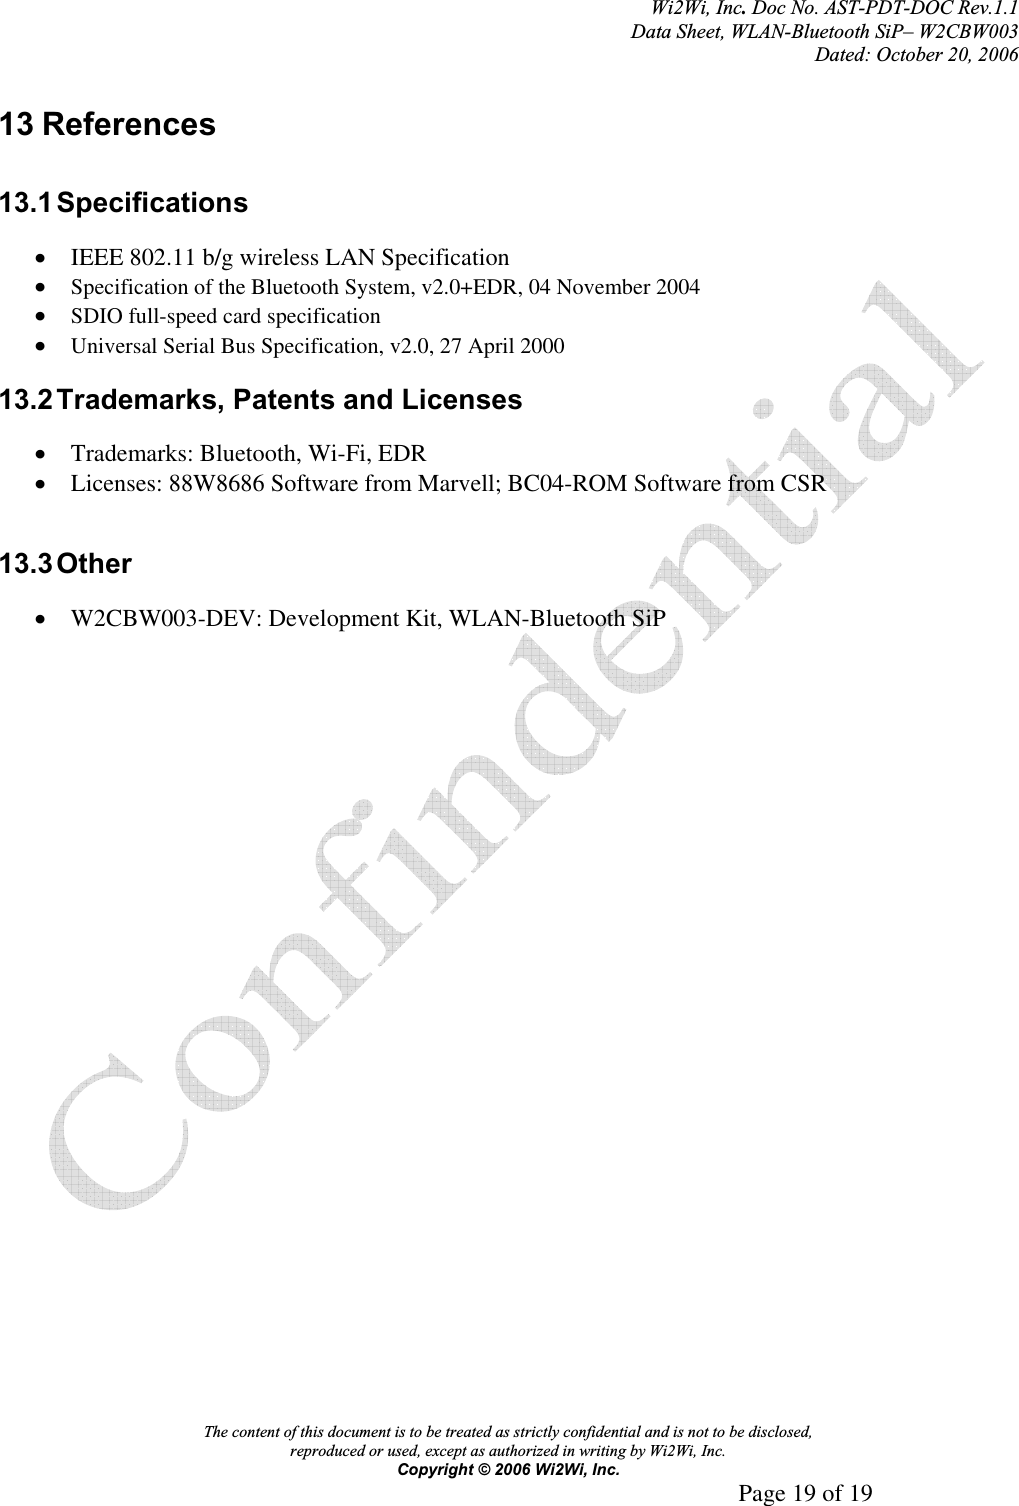 Wi2Wi, Inc.Doc No. AST-PDT-DOC Rev.1.1  Data Sheet, WLAN-Bluetooth SiP– W2CBW003 Dated: October 20, 2006 The content of this document is to be treated as strictly confidential and is not to be disclosed,  reproduced or used, except as authorized in writing by Wi2Wi, Inc.  Copyright © 2006 Wi2Wi, Inc.     Page 19 of 19   13 References 13.1 Specifications xIEEE 802.11 b/g wireless LAN Specification xSpecification of the Bluetooth System, v2.0+EDR, 04 November 2004xSDIO full-speed card specificationxUniversal Serial Bus Specification, v2.0, 27 April 200013.2 Trademarks, Patents and Licenses xTrademarks: Bluetooth, Wi-Fi, EDR xLicenses: 88W8686 Software from Marvell; BC04-ROM Software from CSR 13.3 Other xW2CBW003-DEV: Development Kit, WLAN-Bluetooth SiP 